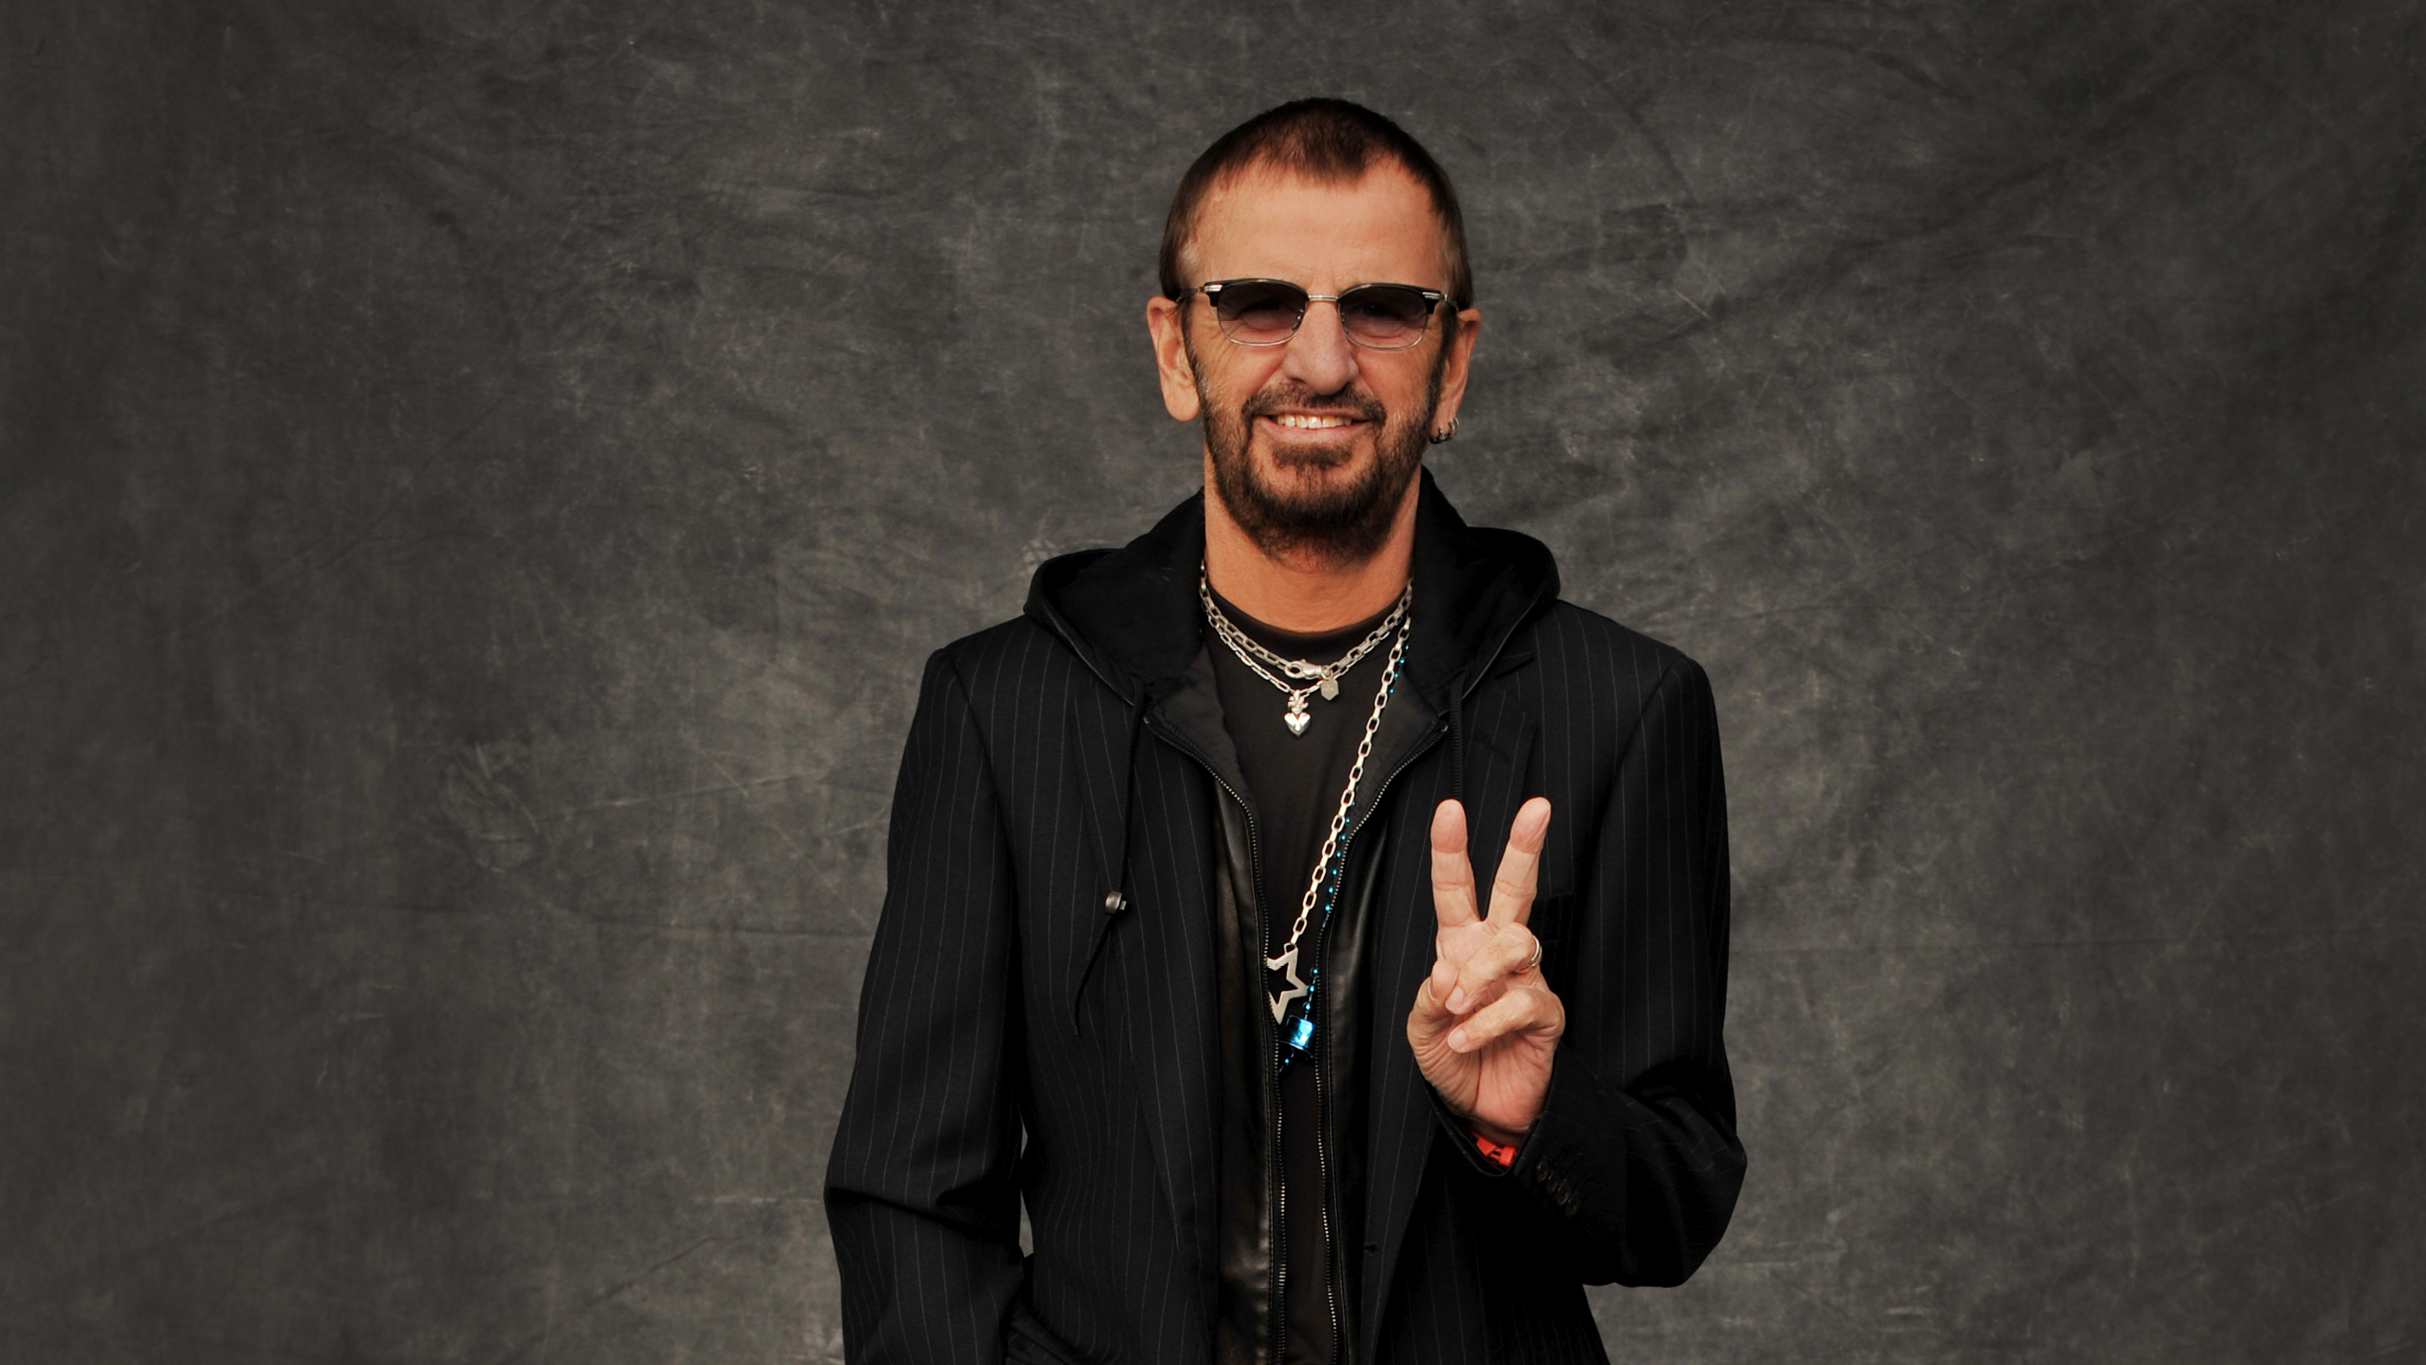 RINGO STARR & HIS ALL-STARR BAND